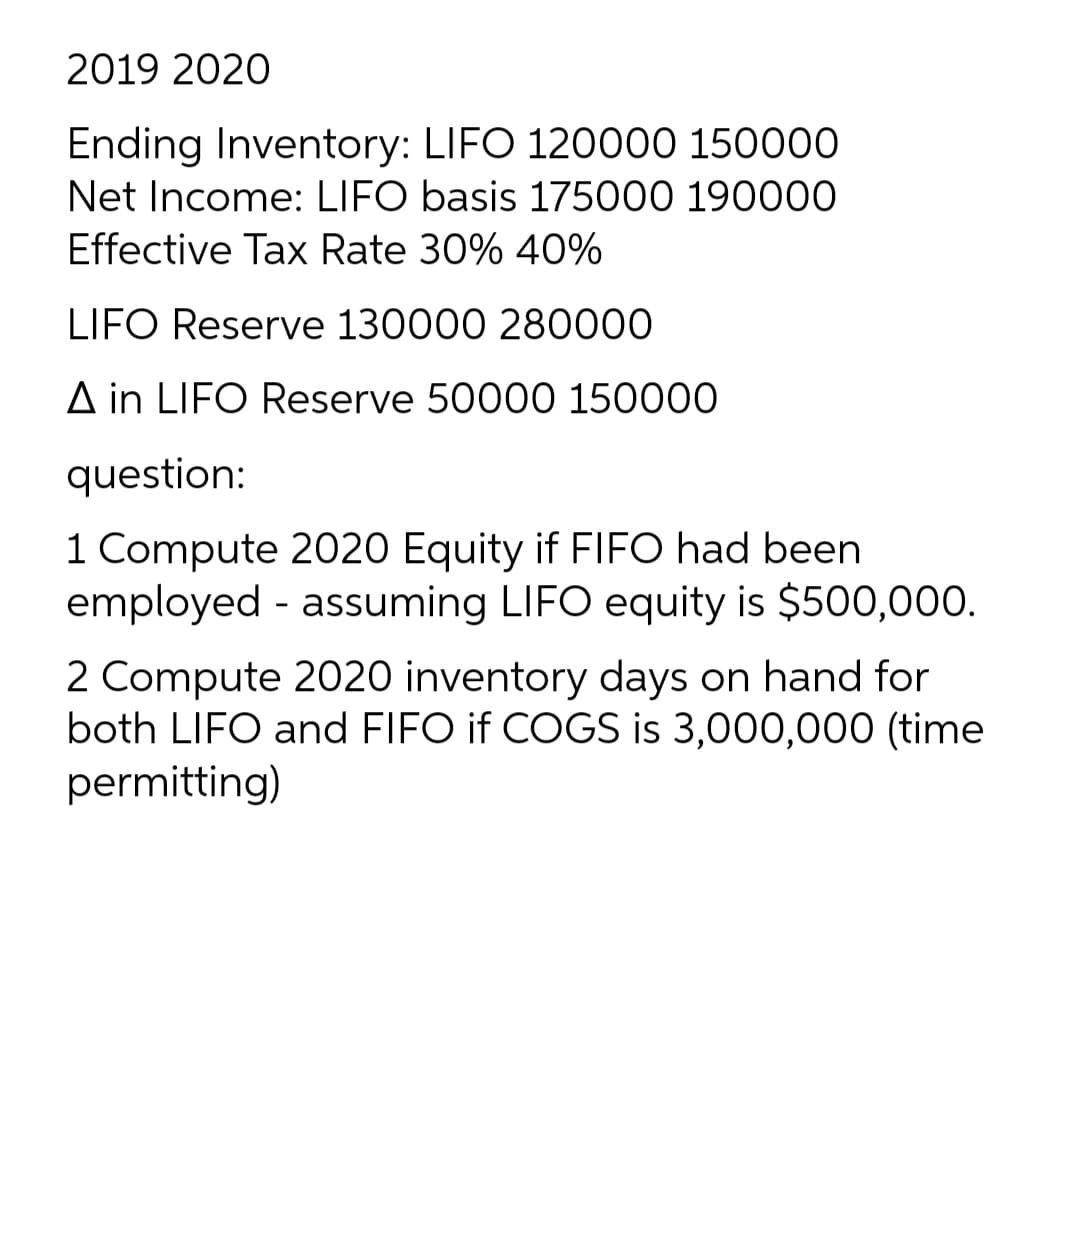 2019 2020
Ending Inventory: LIFO 120000 150000
Net Income: LIFO basis 175000 190000
Effective Tax Rate 30% 40%
LIFO Reserve 130000 280000
A in LIFO Reserve 50000 150000
question:
1 Compute 2020 Equity if FIFO had been
employed - assuming LIFO equity is $500,000.
2 Compute 2020 inventory days on hand for
both LIFO and FIFO if COGS is 3,000,000 (time
permitting)
